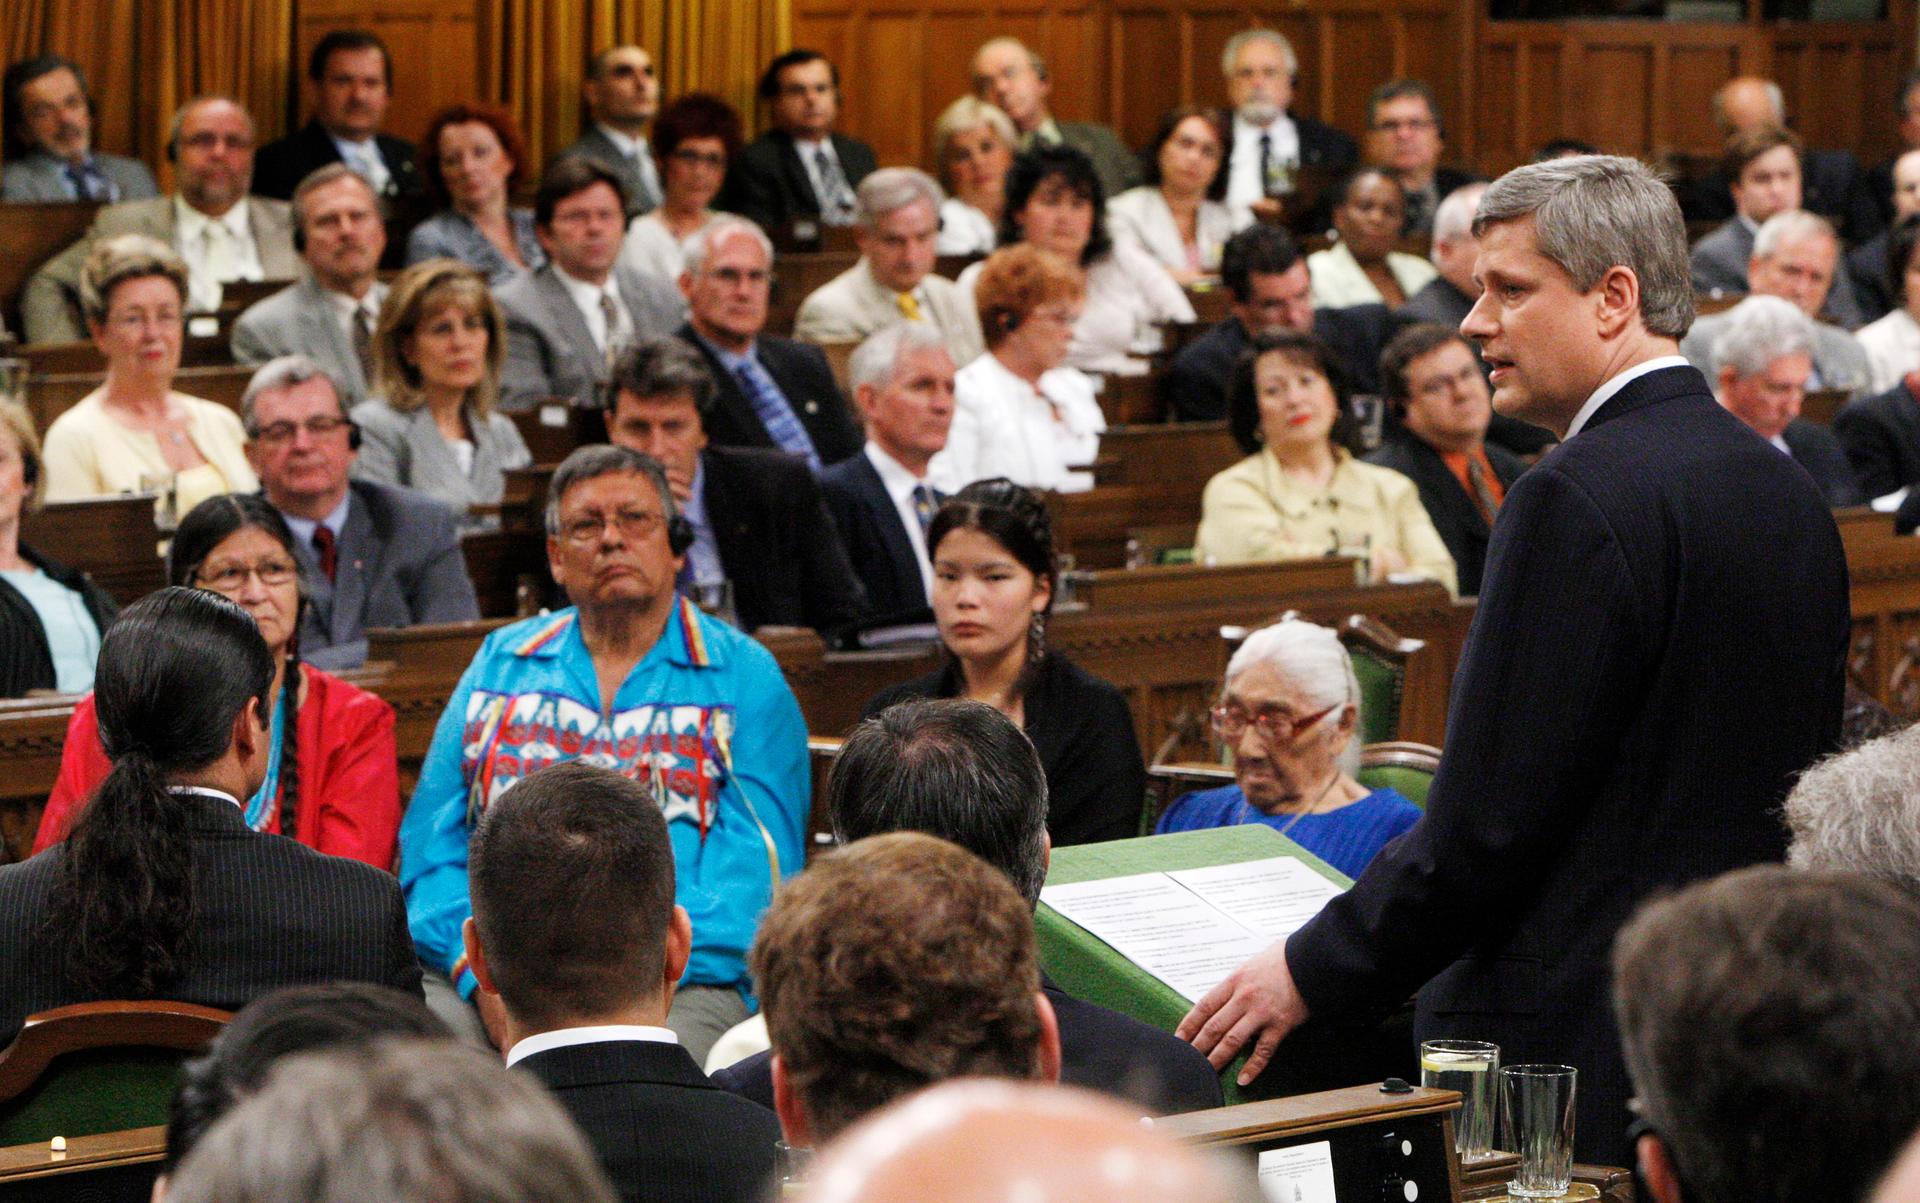 Canada's Prime Minister Stephen Harper issues an apology in the House of Commons on Parliament Hill in Ottawa June 11, 2008.